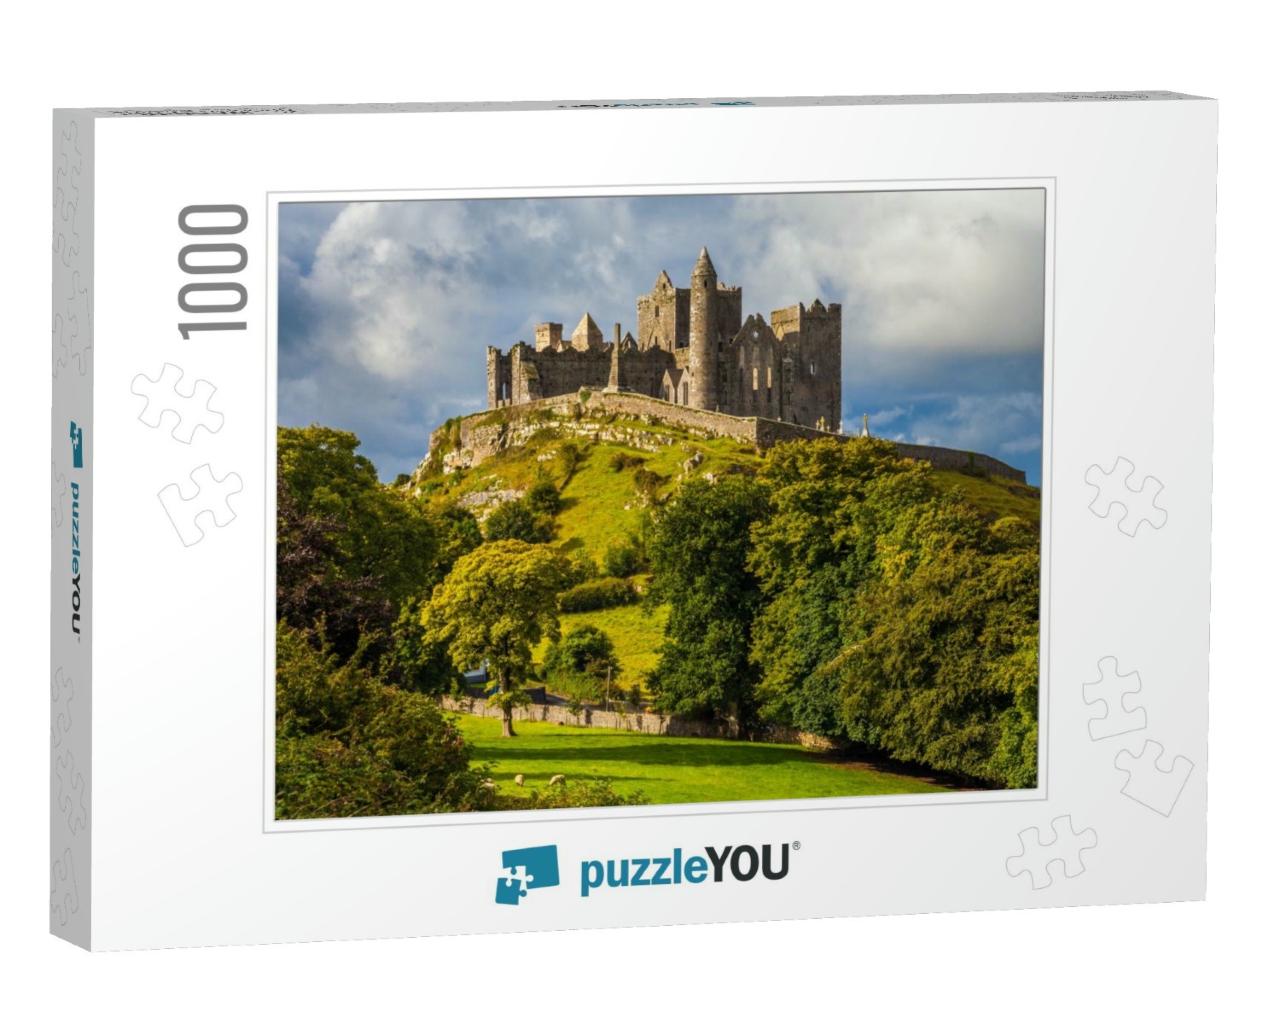 Rock of Cashel... Jigsaw Puzzle with 1000 pieces